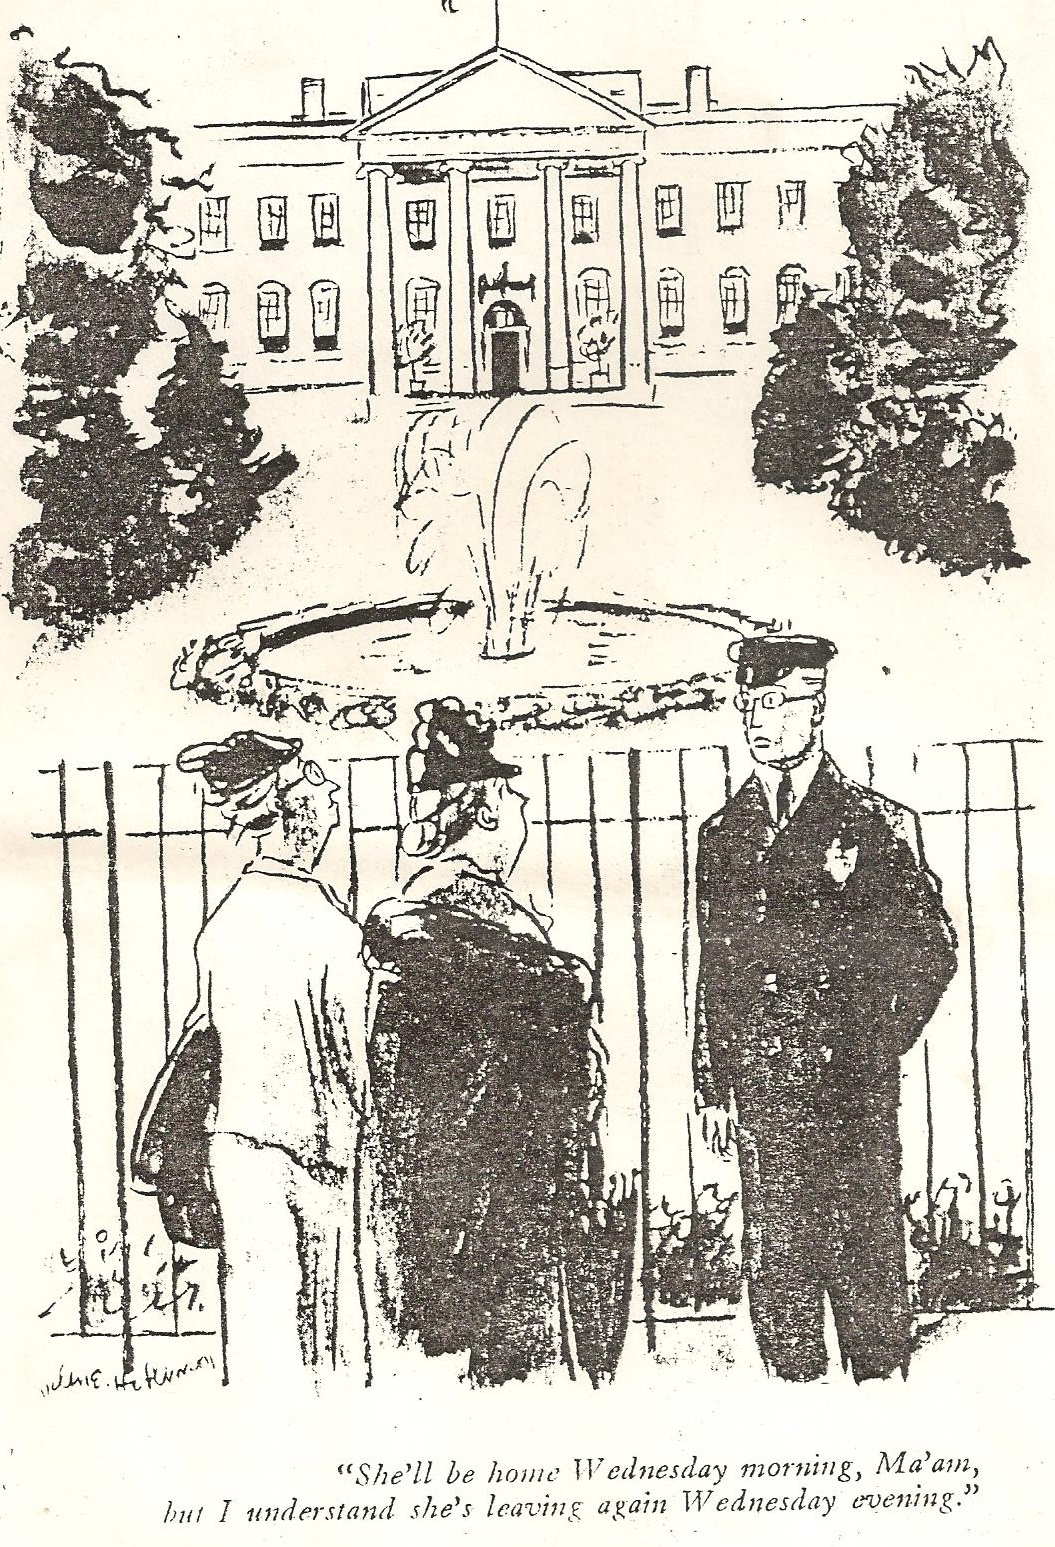 Another cartoon referencing the fact that Eleanor Roosevelt was rarely in residence at the White House.